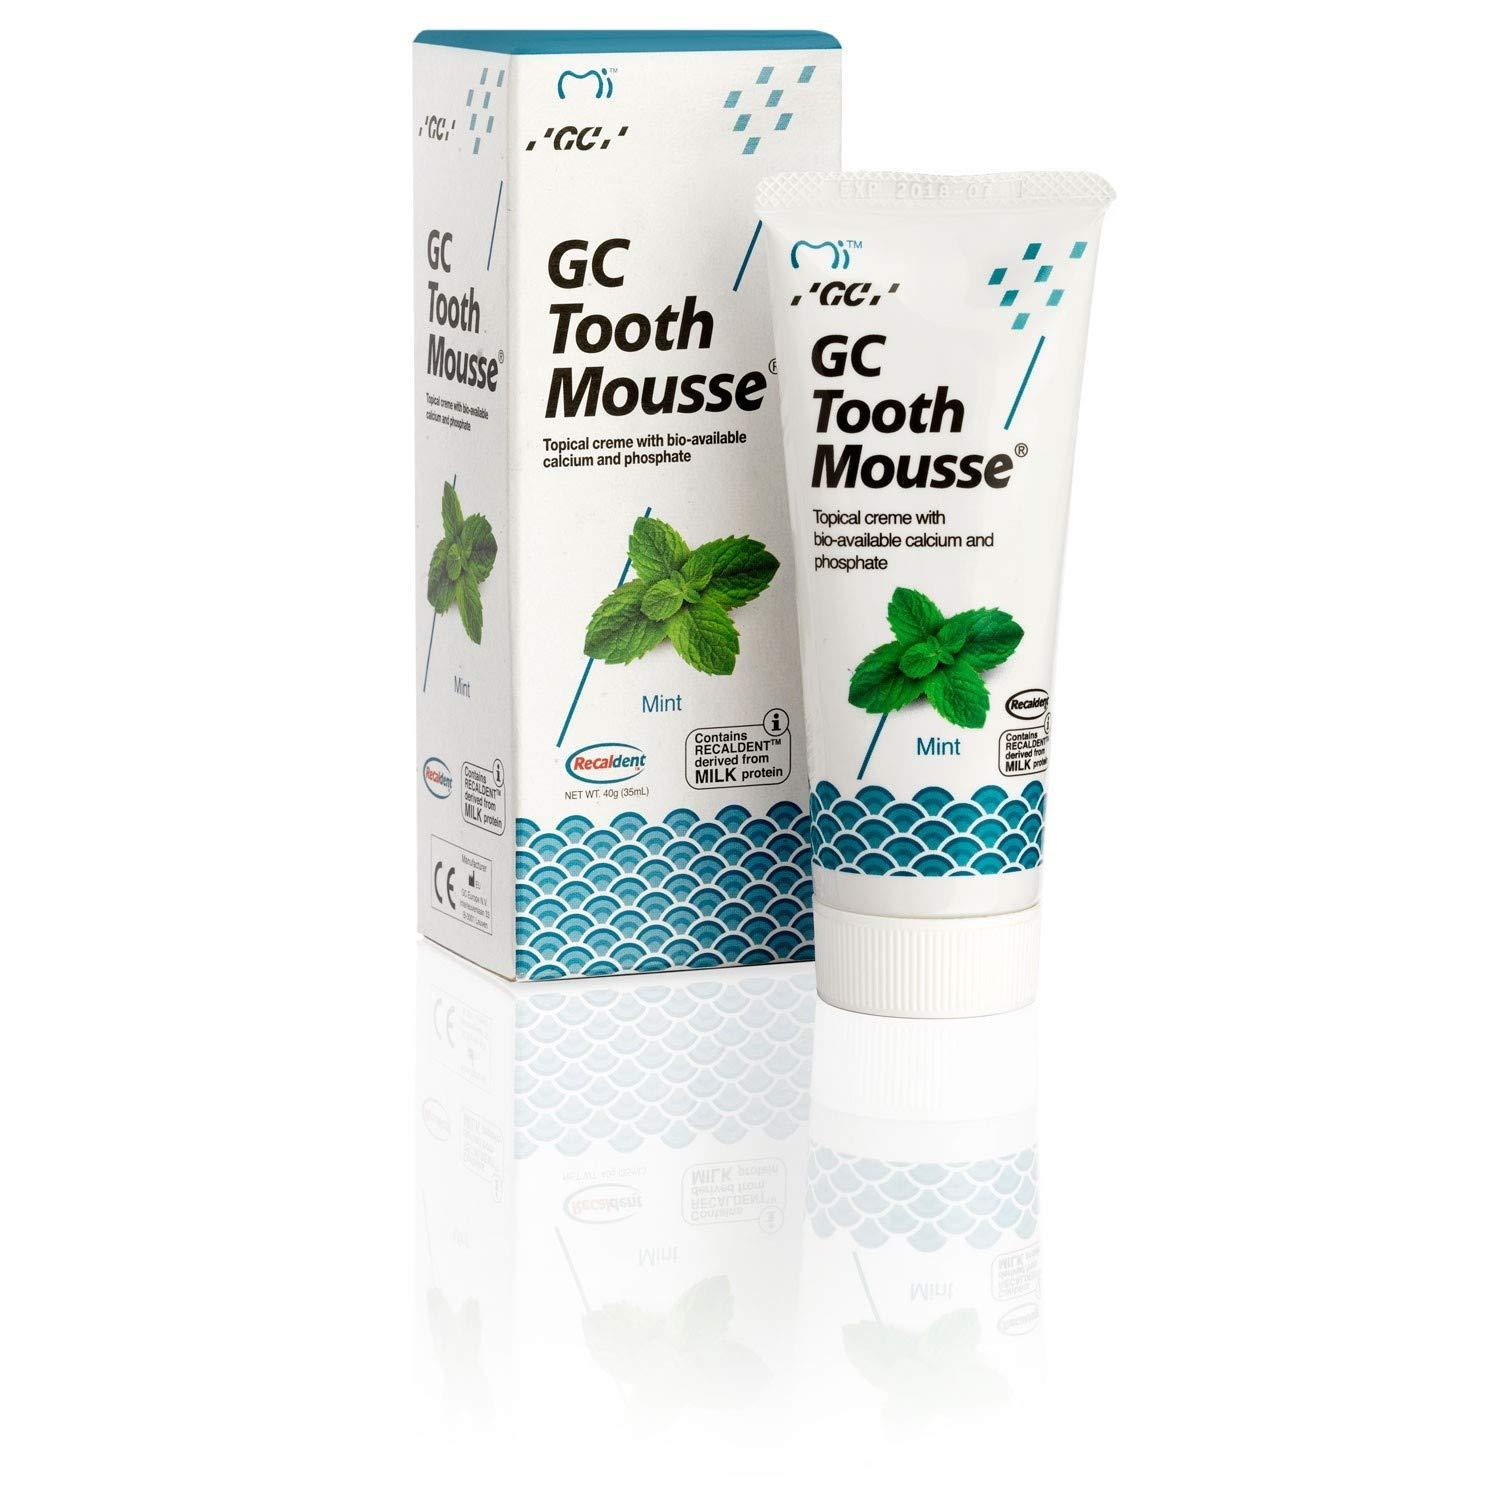 GC Tooth Mousse Plus 1 X40GM Dental Product (Mint)